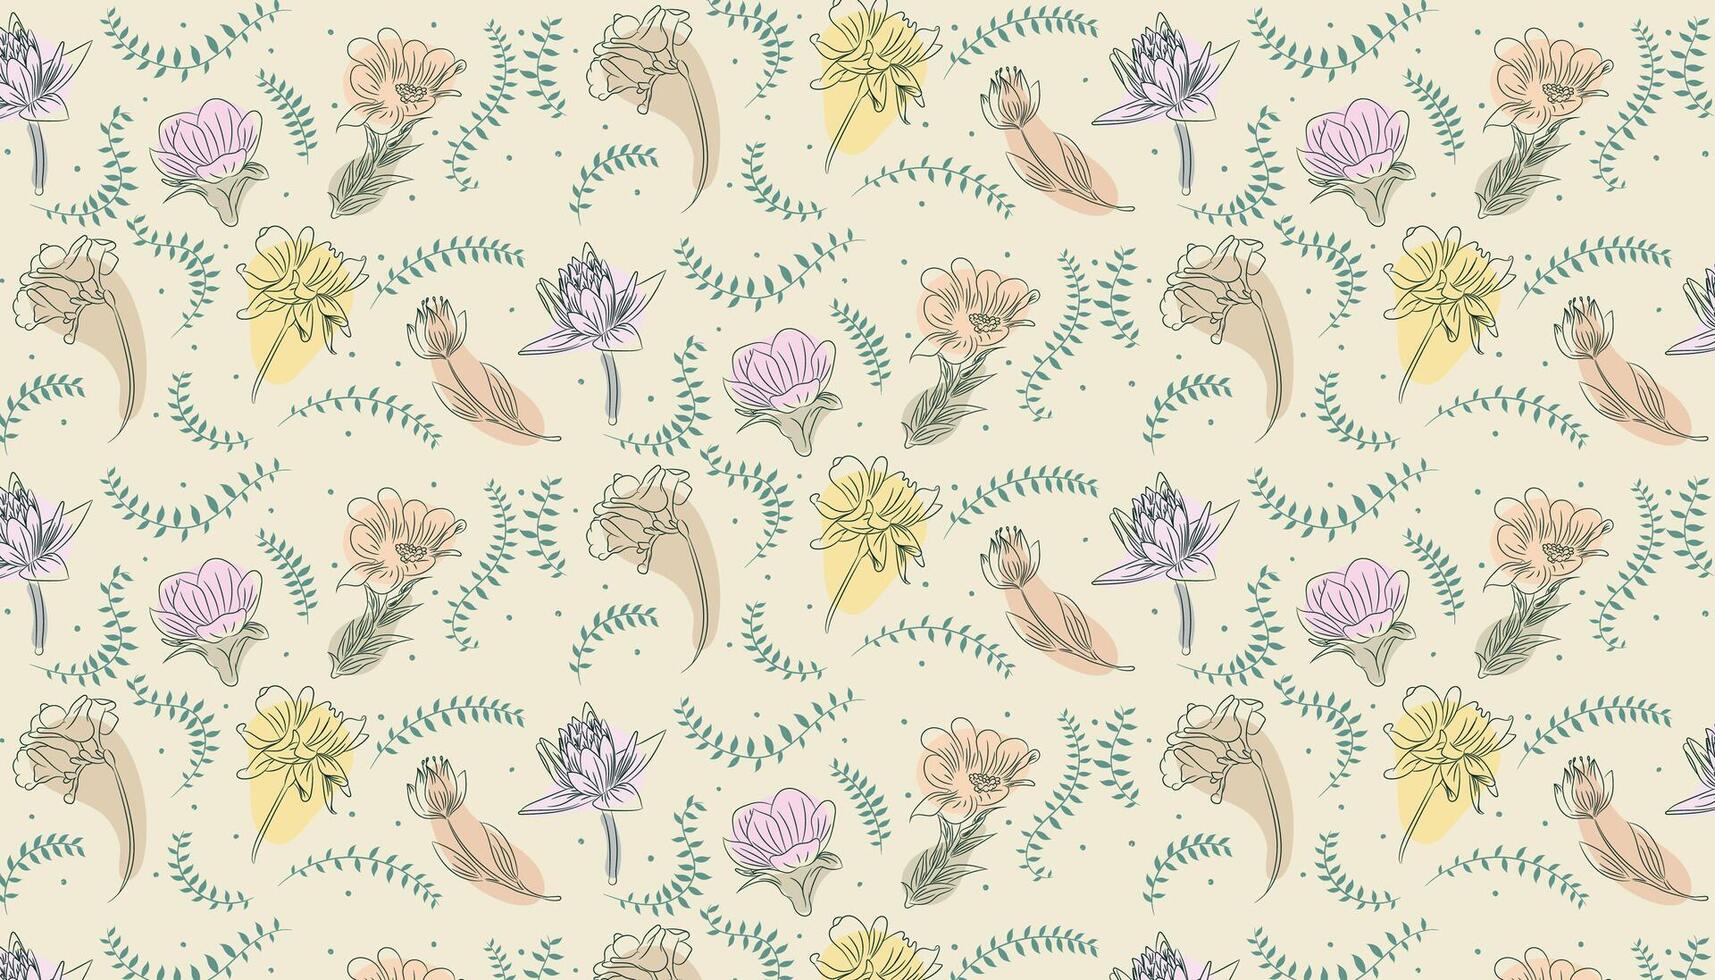 texture with pattern of various flowers and plants in vintage style vector